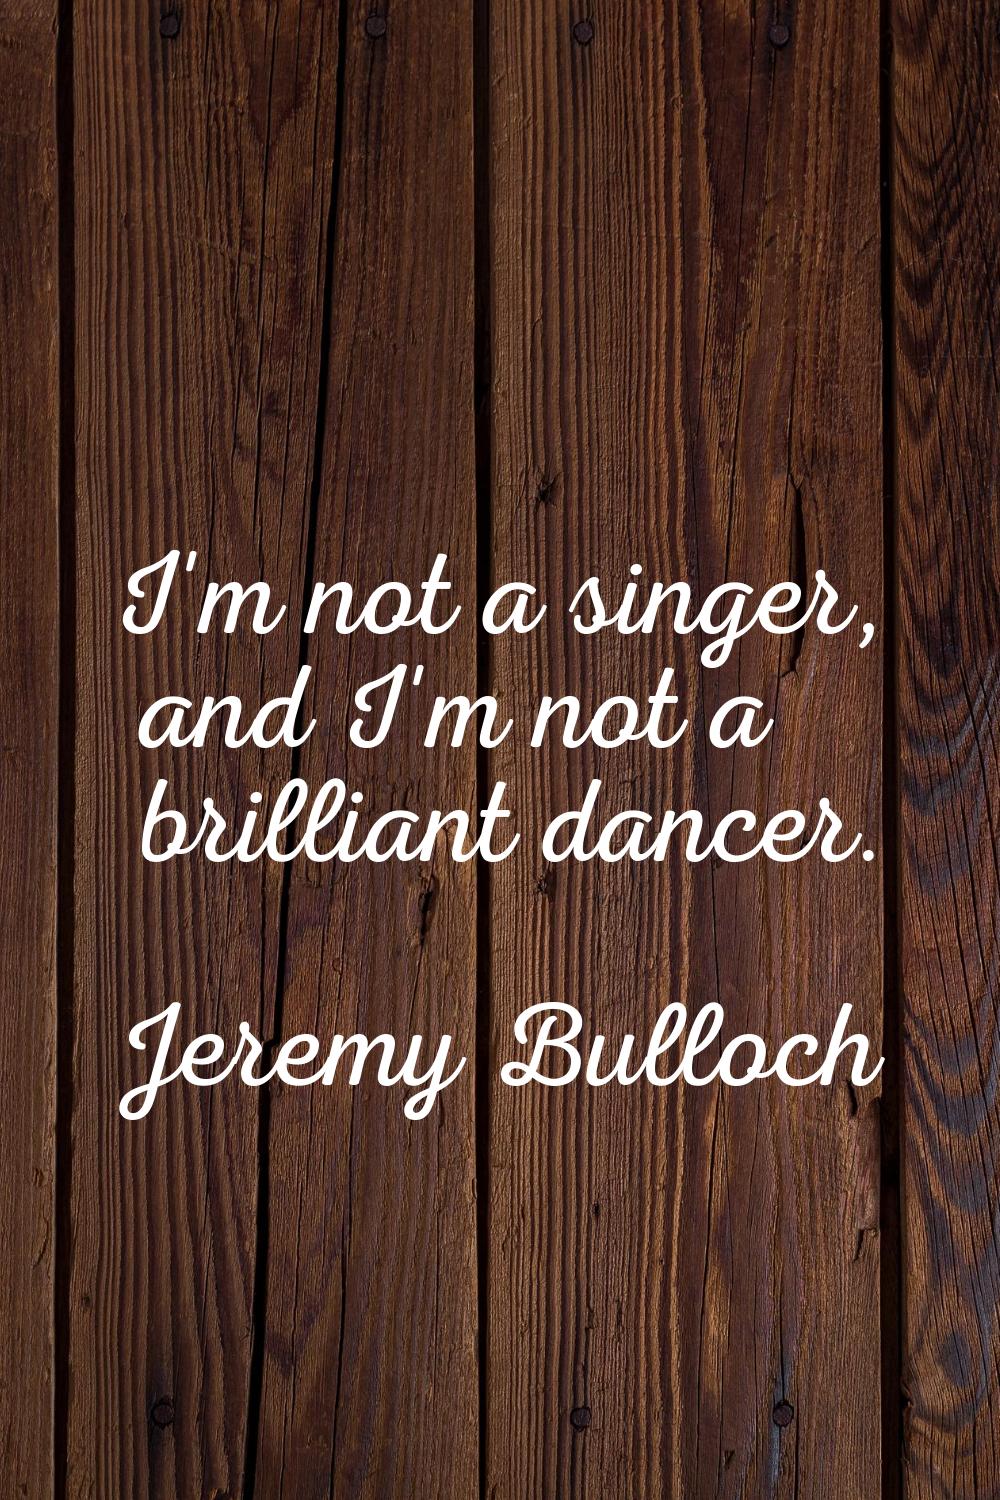 I'm not a singer, and I'm not a brilliant dancer.